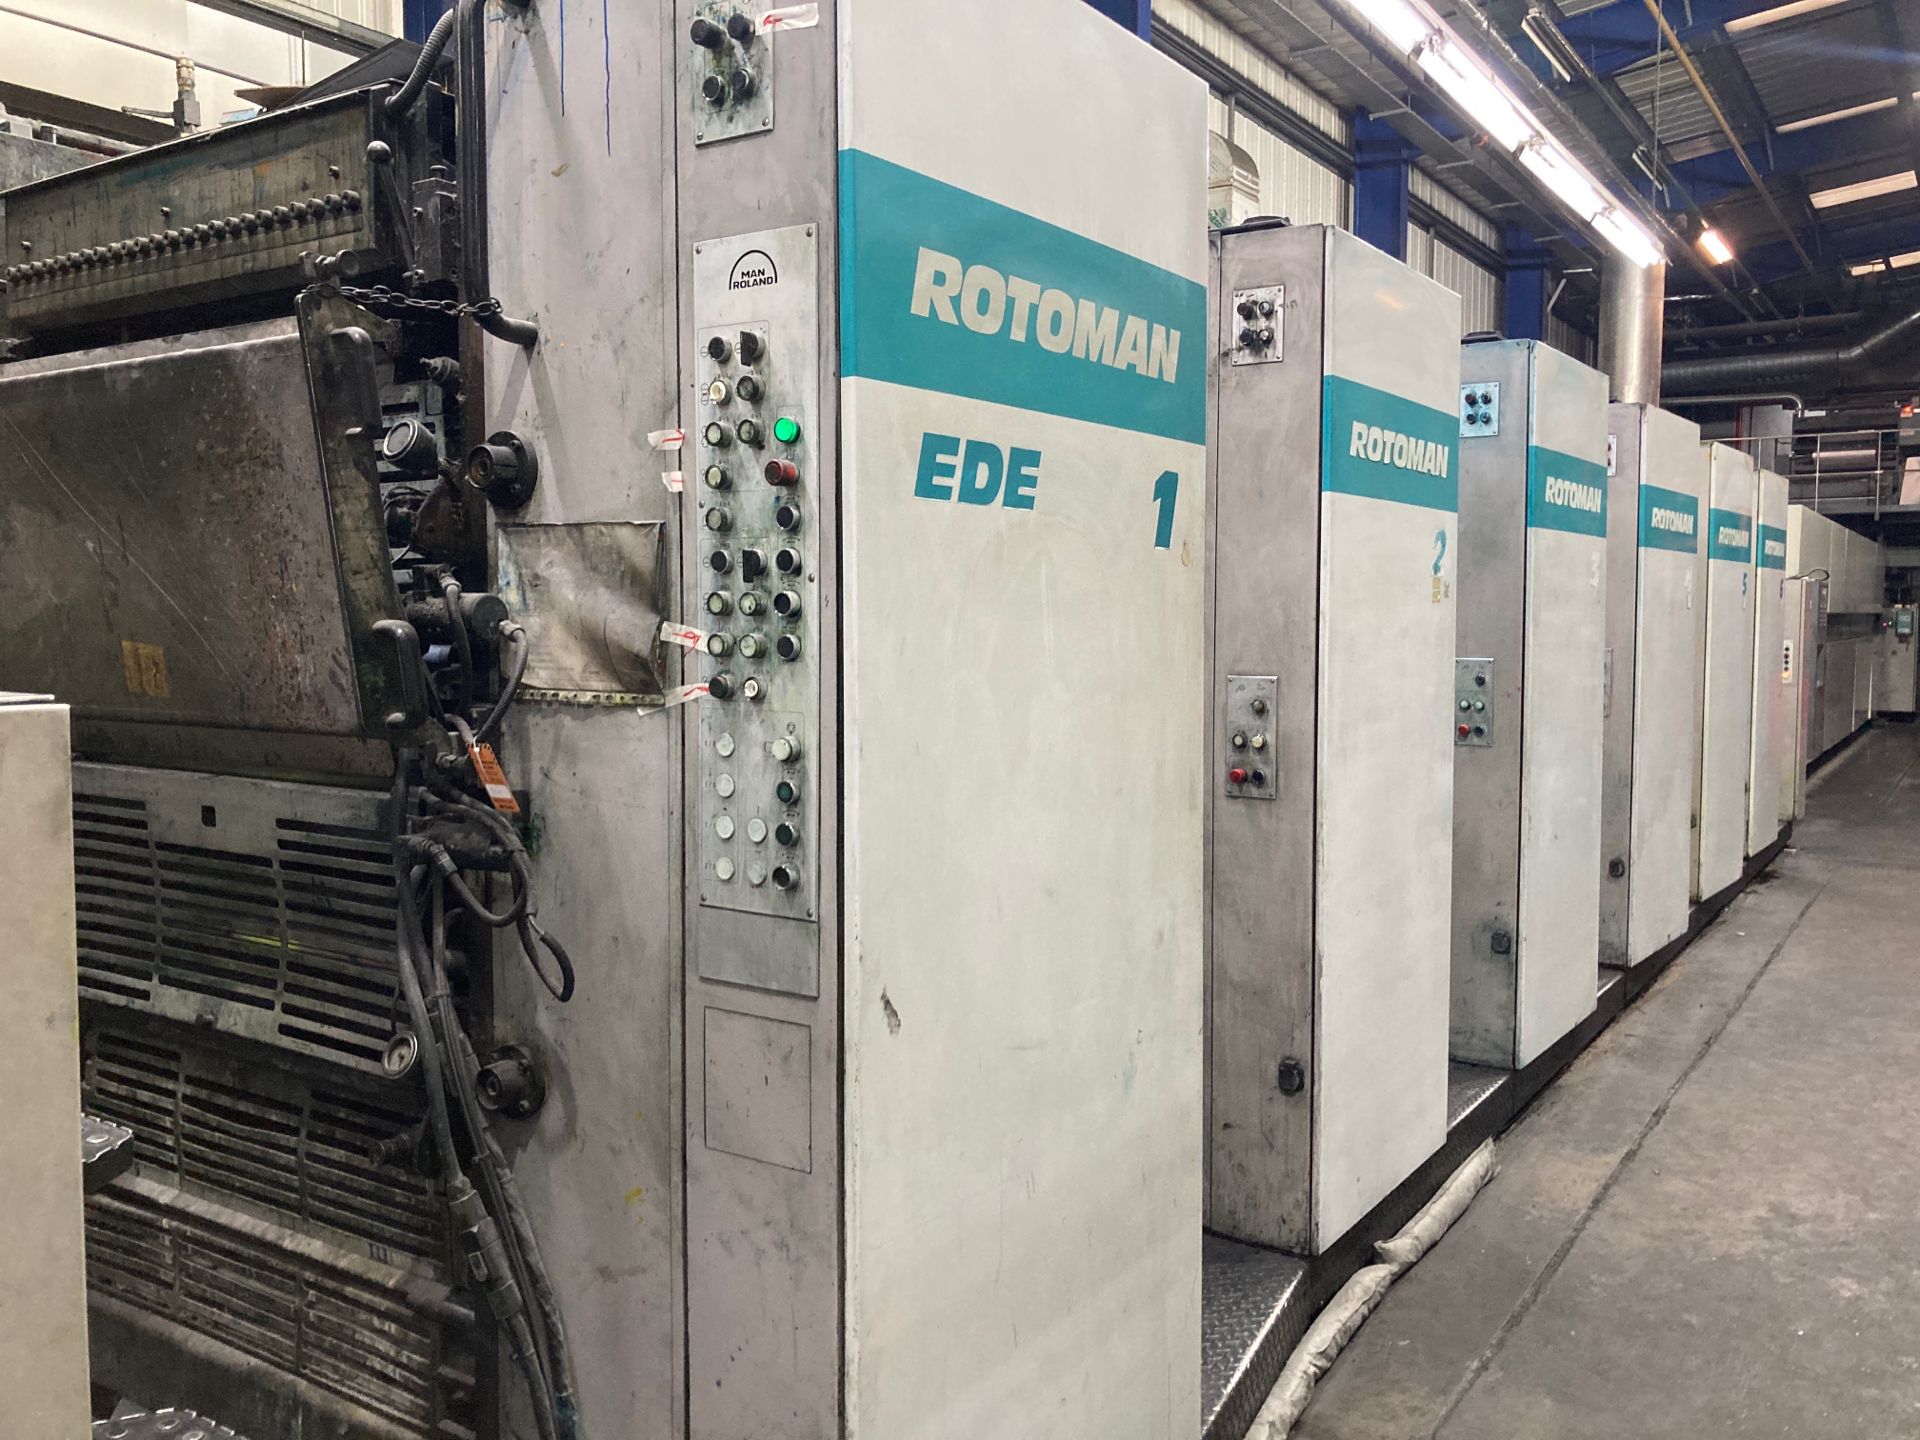 Man Roland Rotoman EDE 6 Station Offset Printing Press and Dryer